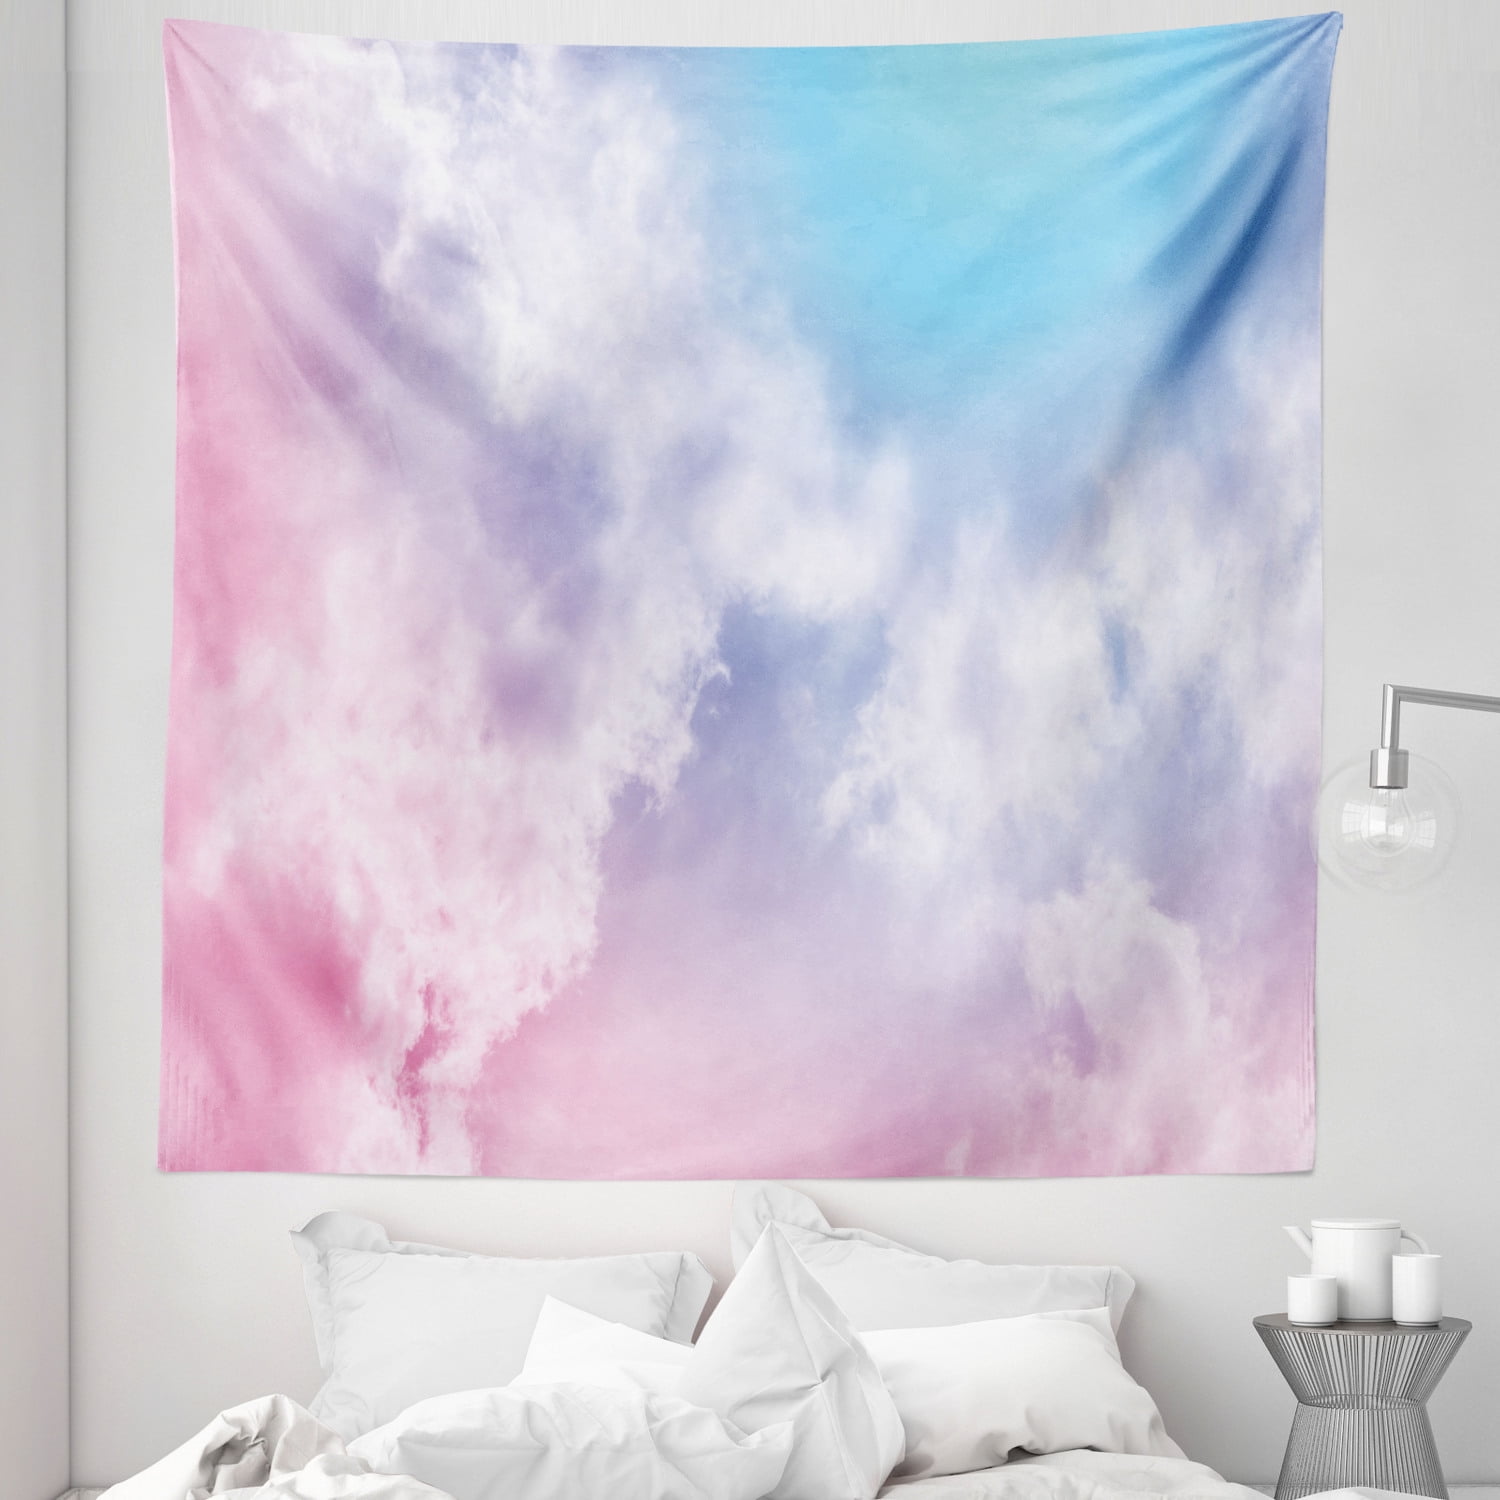 Pastel Tapestry, Fantasy Sky Abstraction Smoky Clouds Foggy Ethereal  Composition, Fabric Wall Hanging Decor for Bedroom Living Room Dorm,  Sizes, Pale Pink Aqua White, by Ambesonne